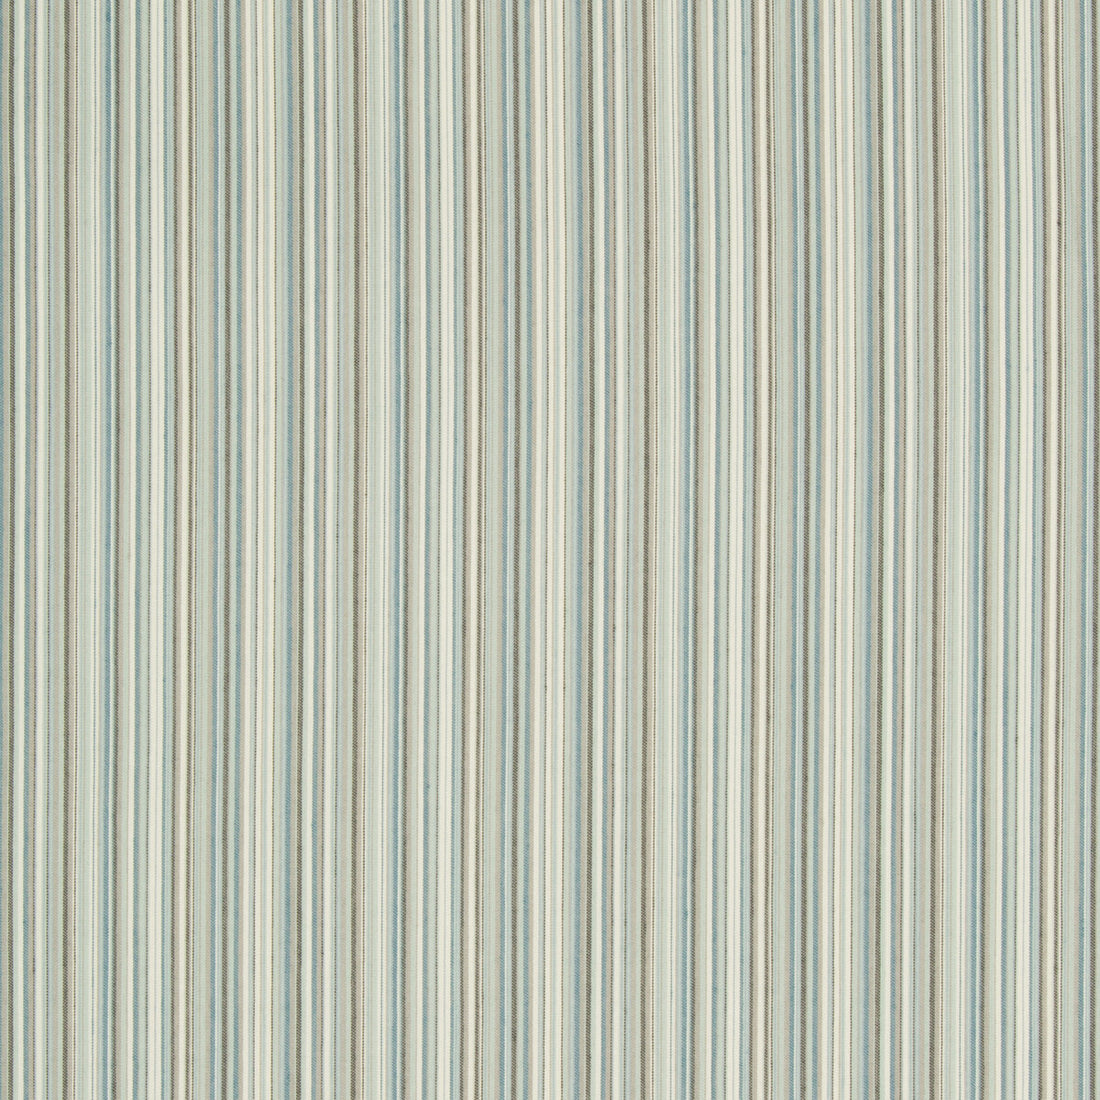 Backstreet fabric in mineral color - pattern 35038.511.0 - by Kravet Contract in the Gis Crypton collection